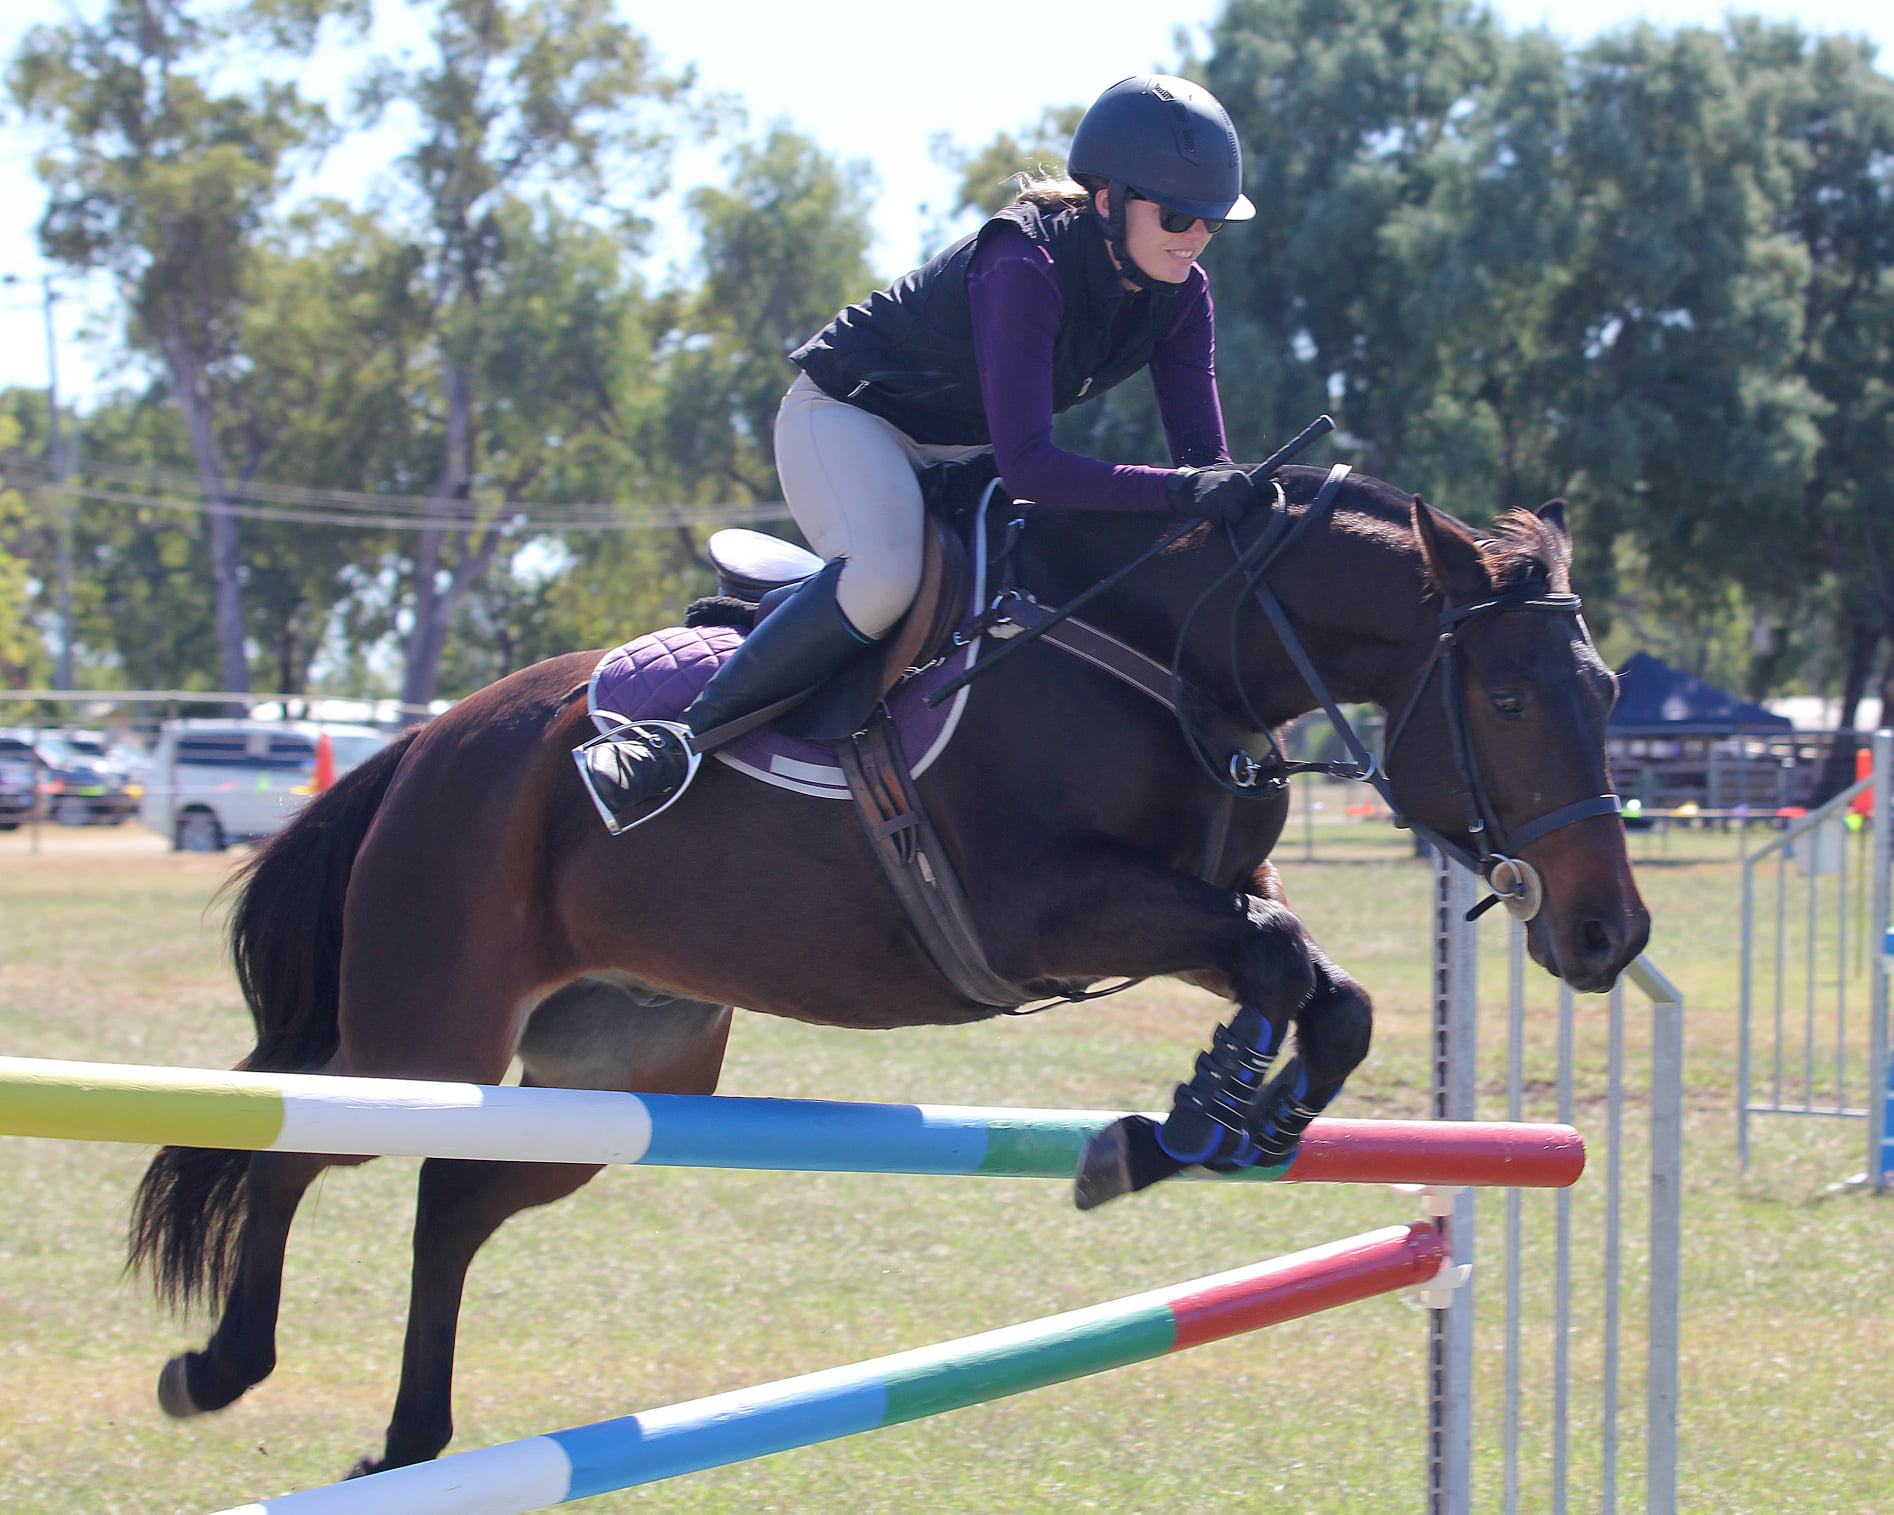 Show Jumping